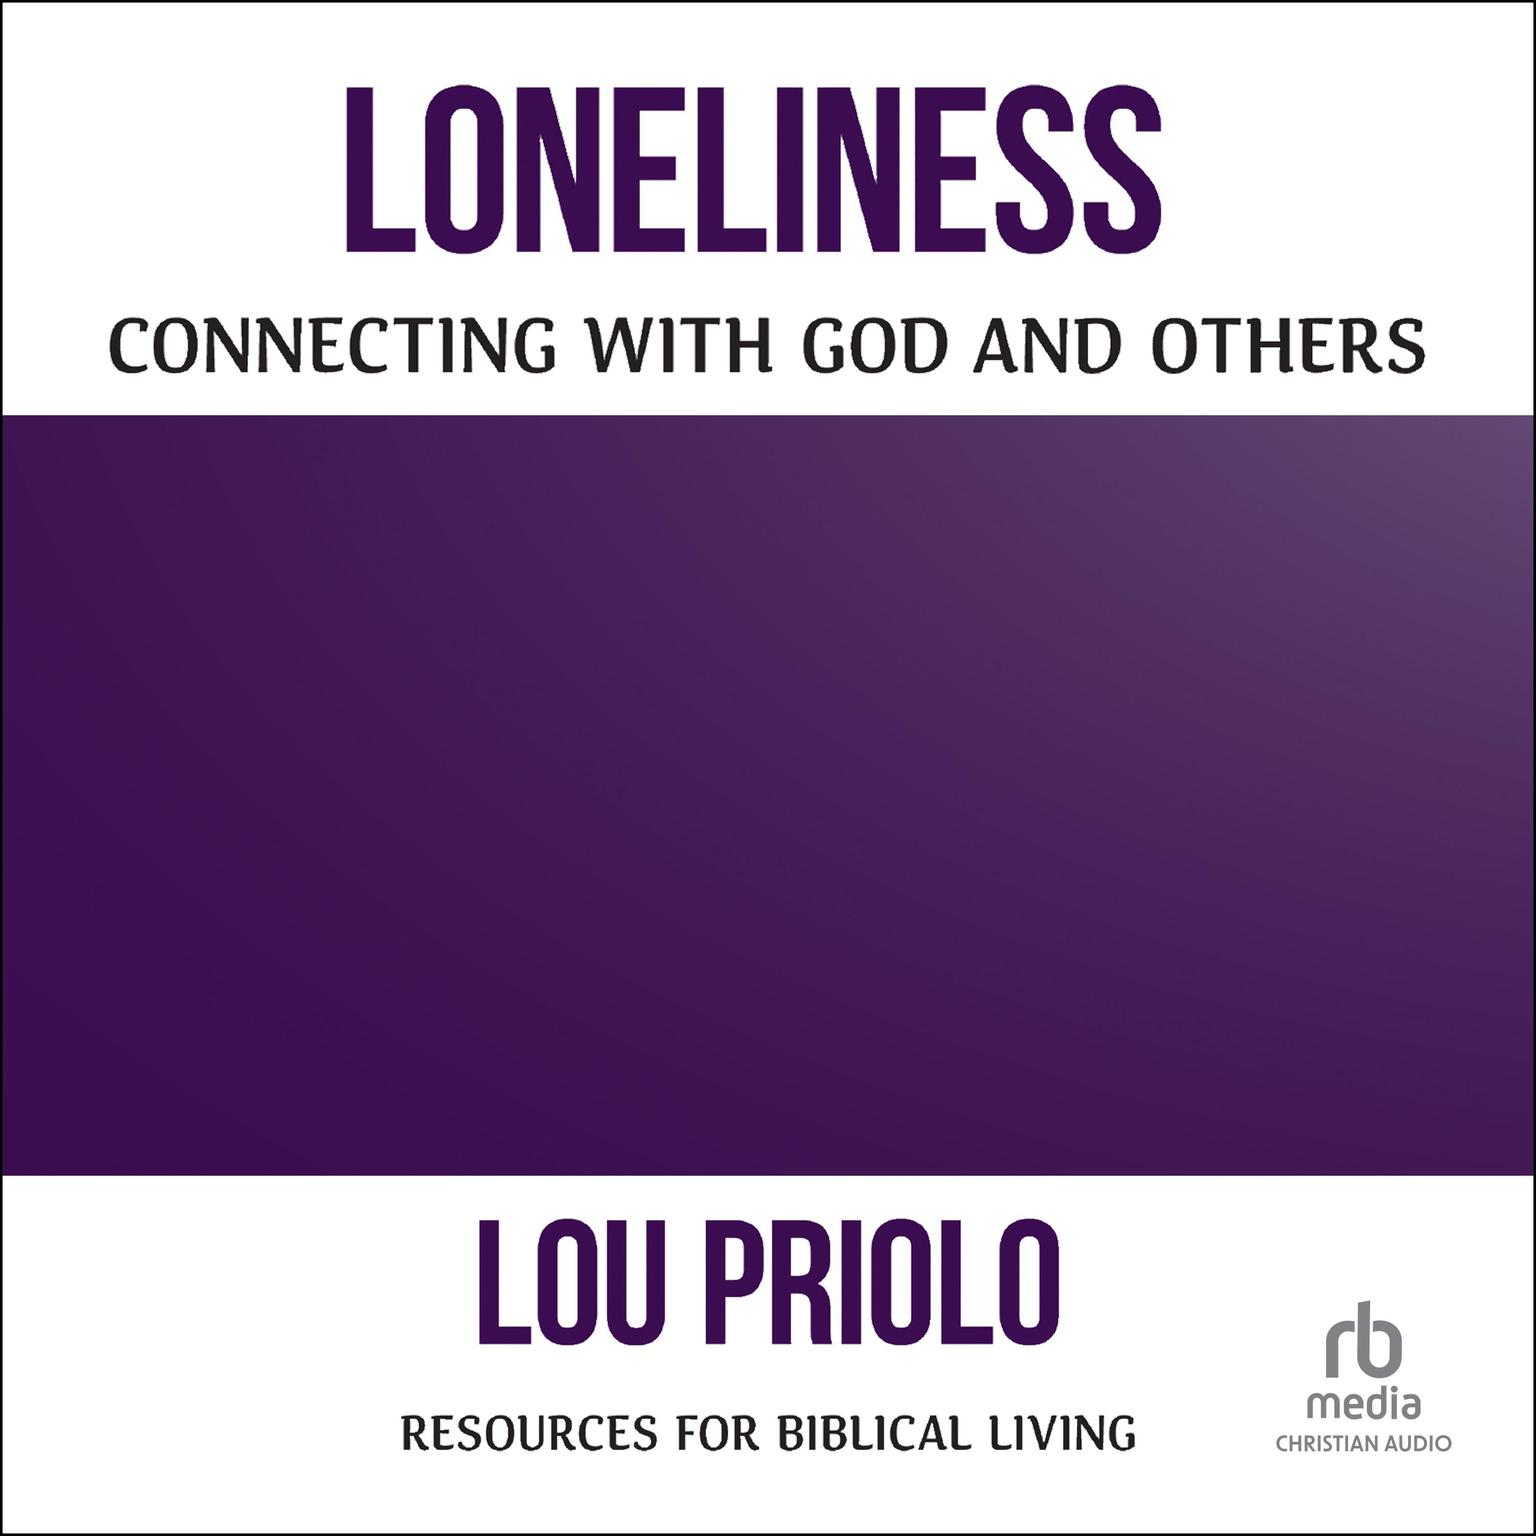 Loneliness: Connecting with God and Others (Resources for Biblical Living) Audiobook, by Lou Priolo